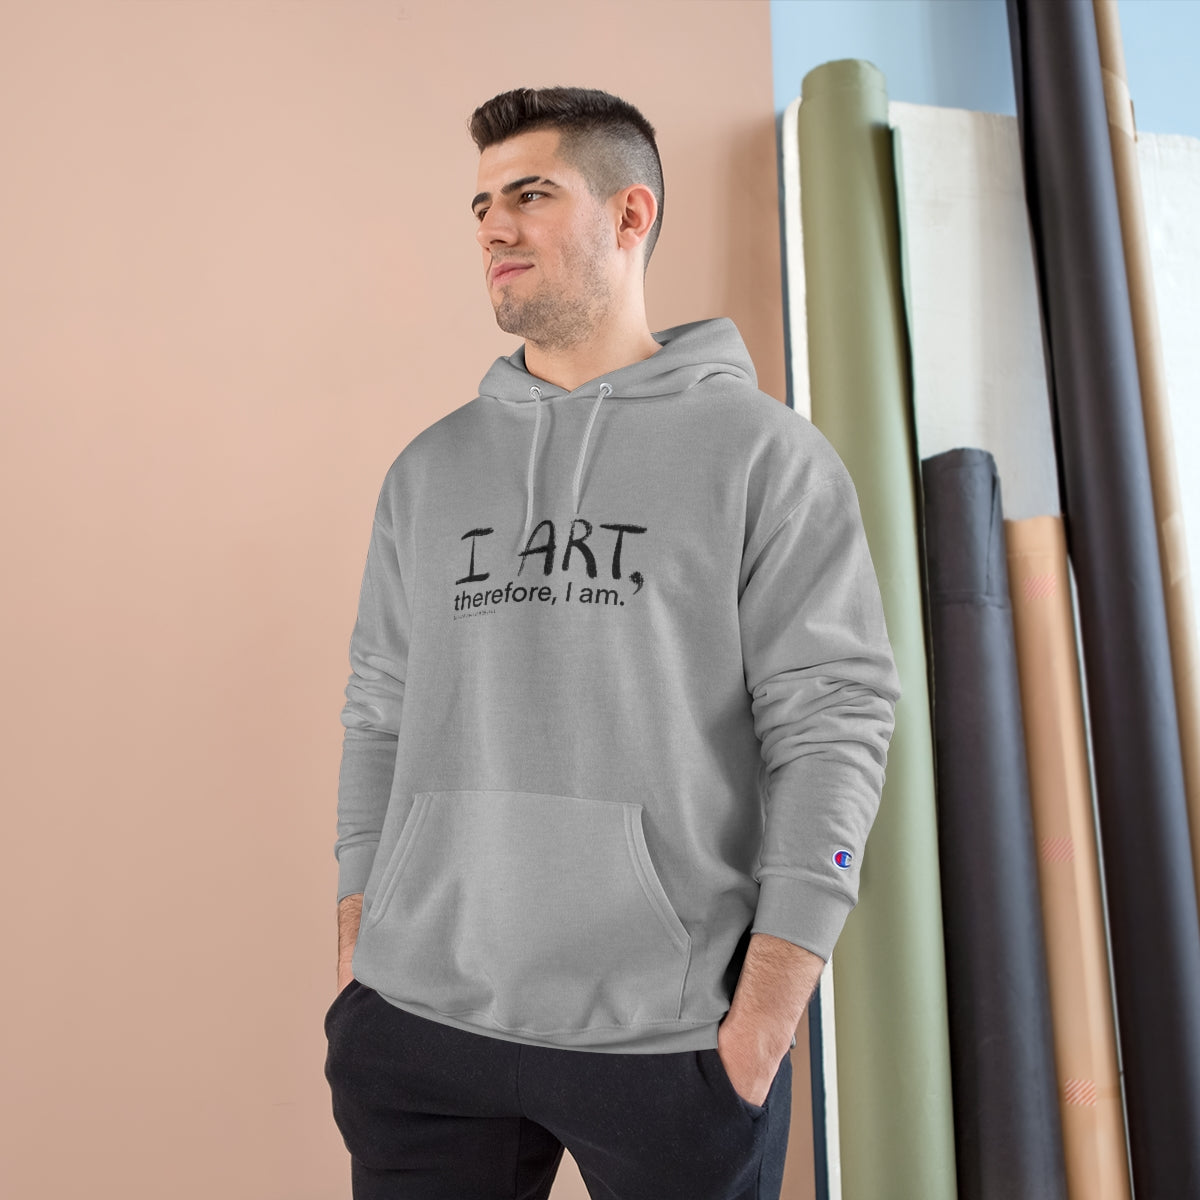 "I art, therefore, I am" Design - Champion Hoodie